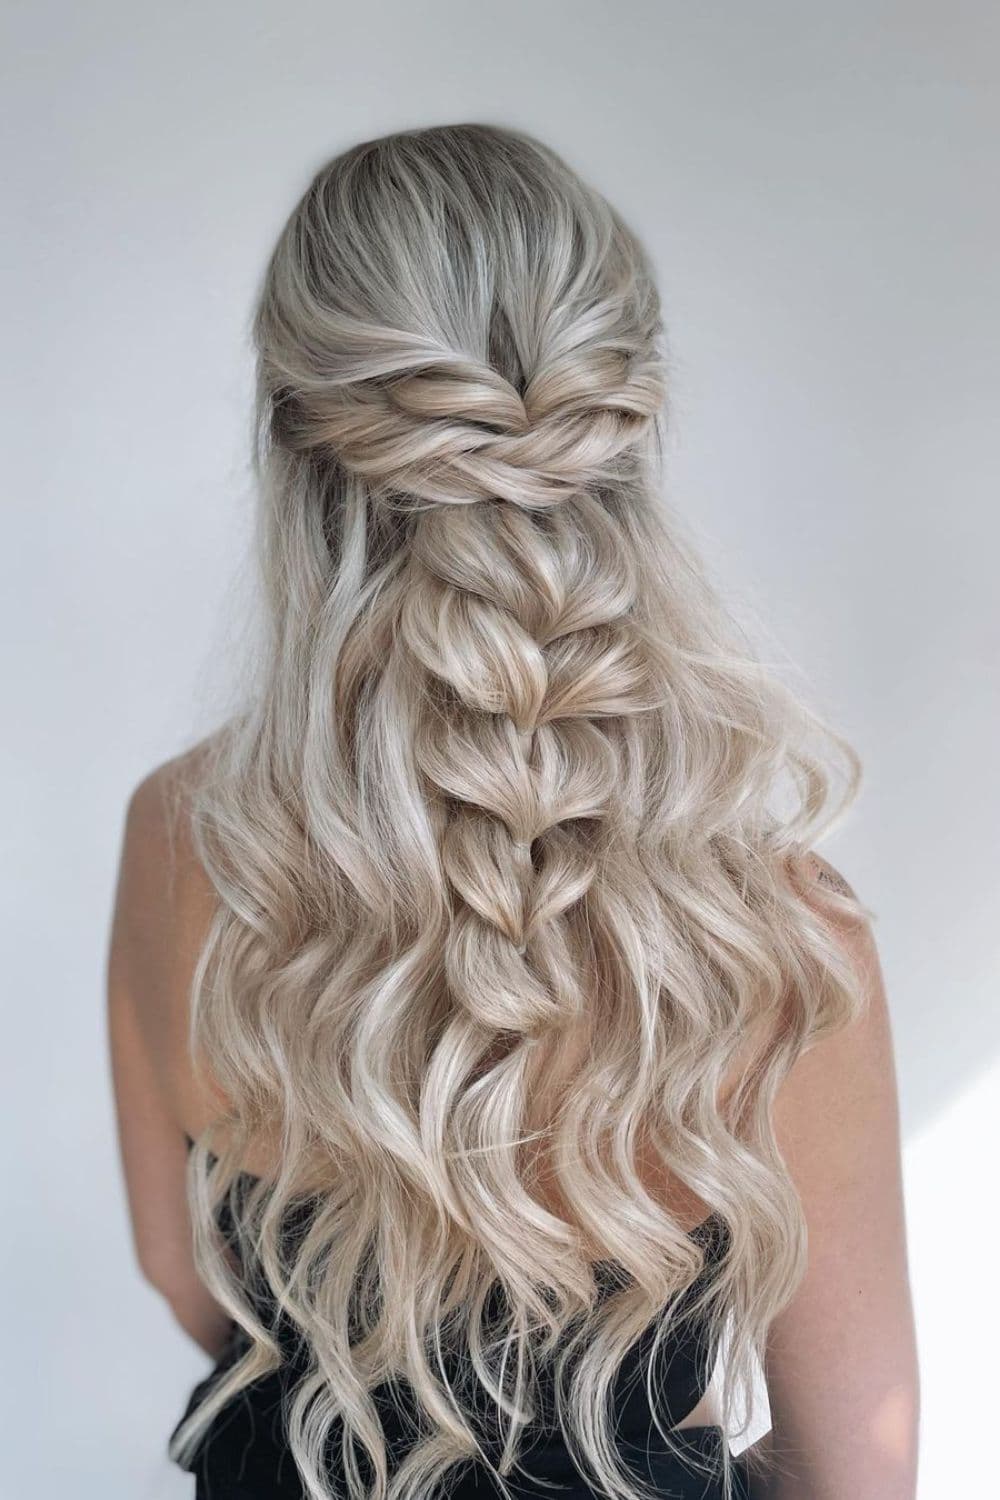 A woman with a long blonde pull-through braid.